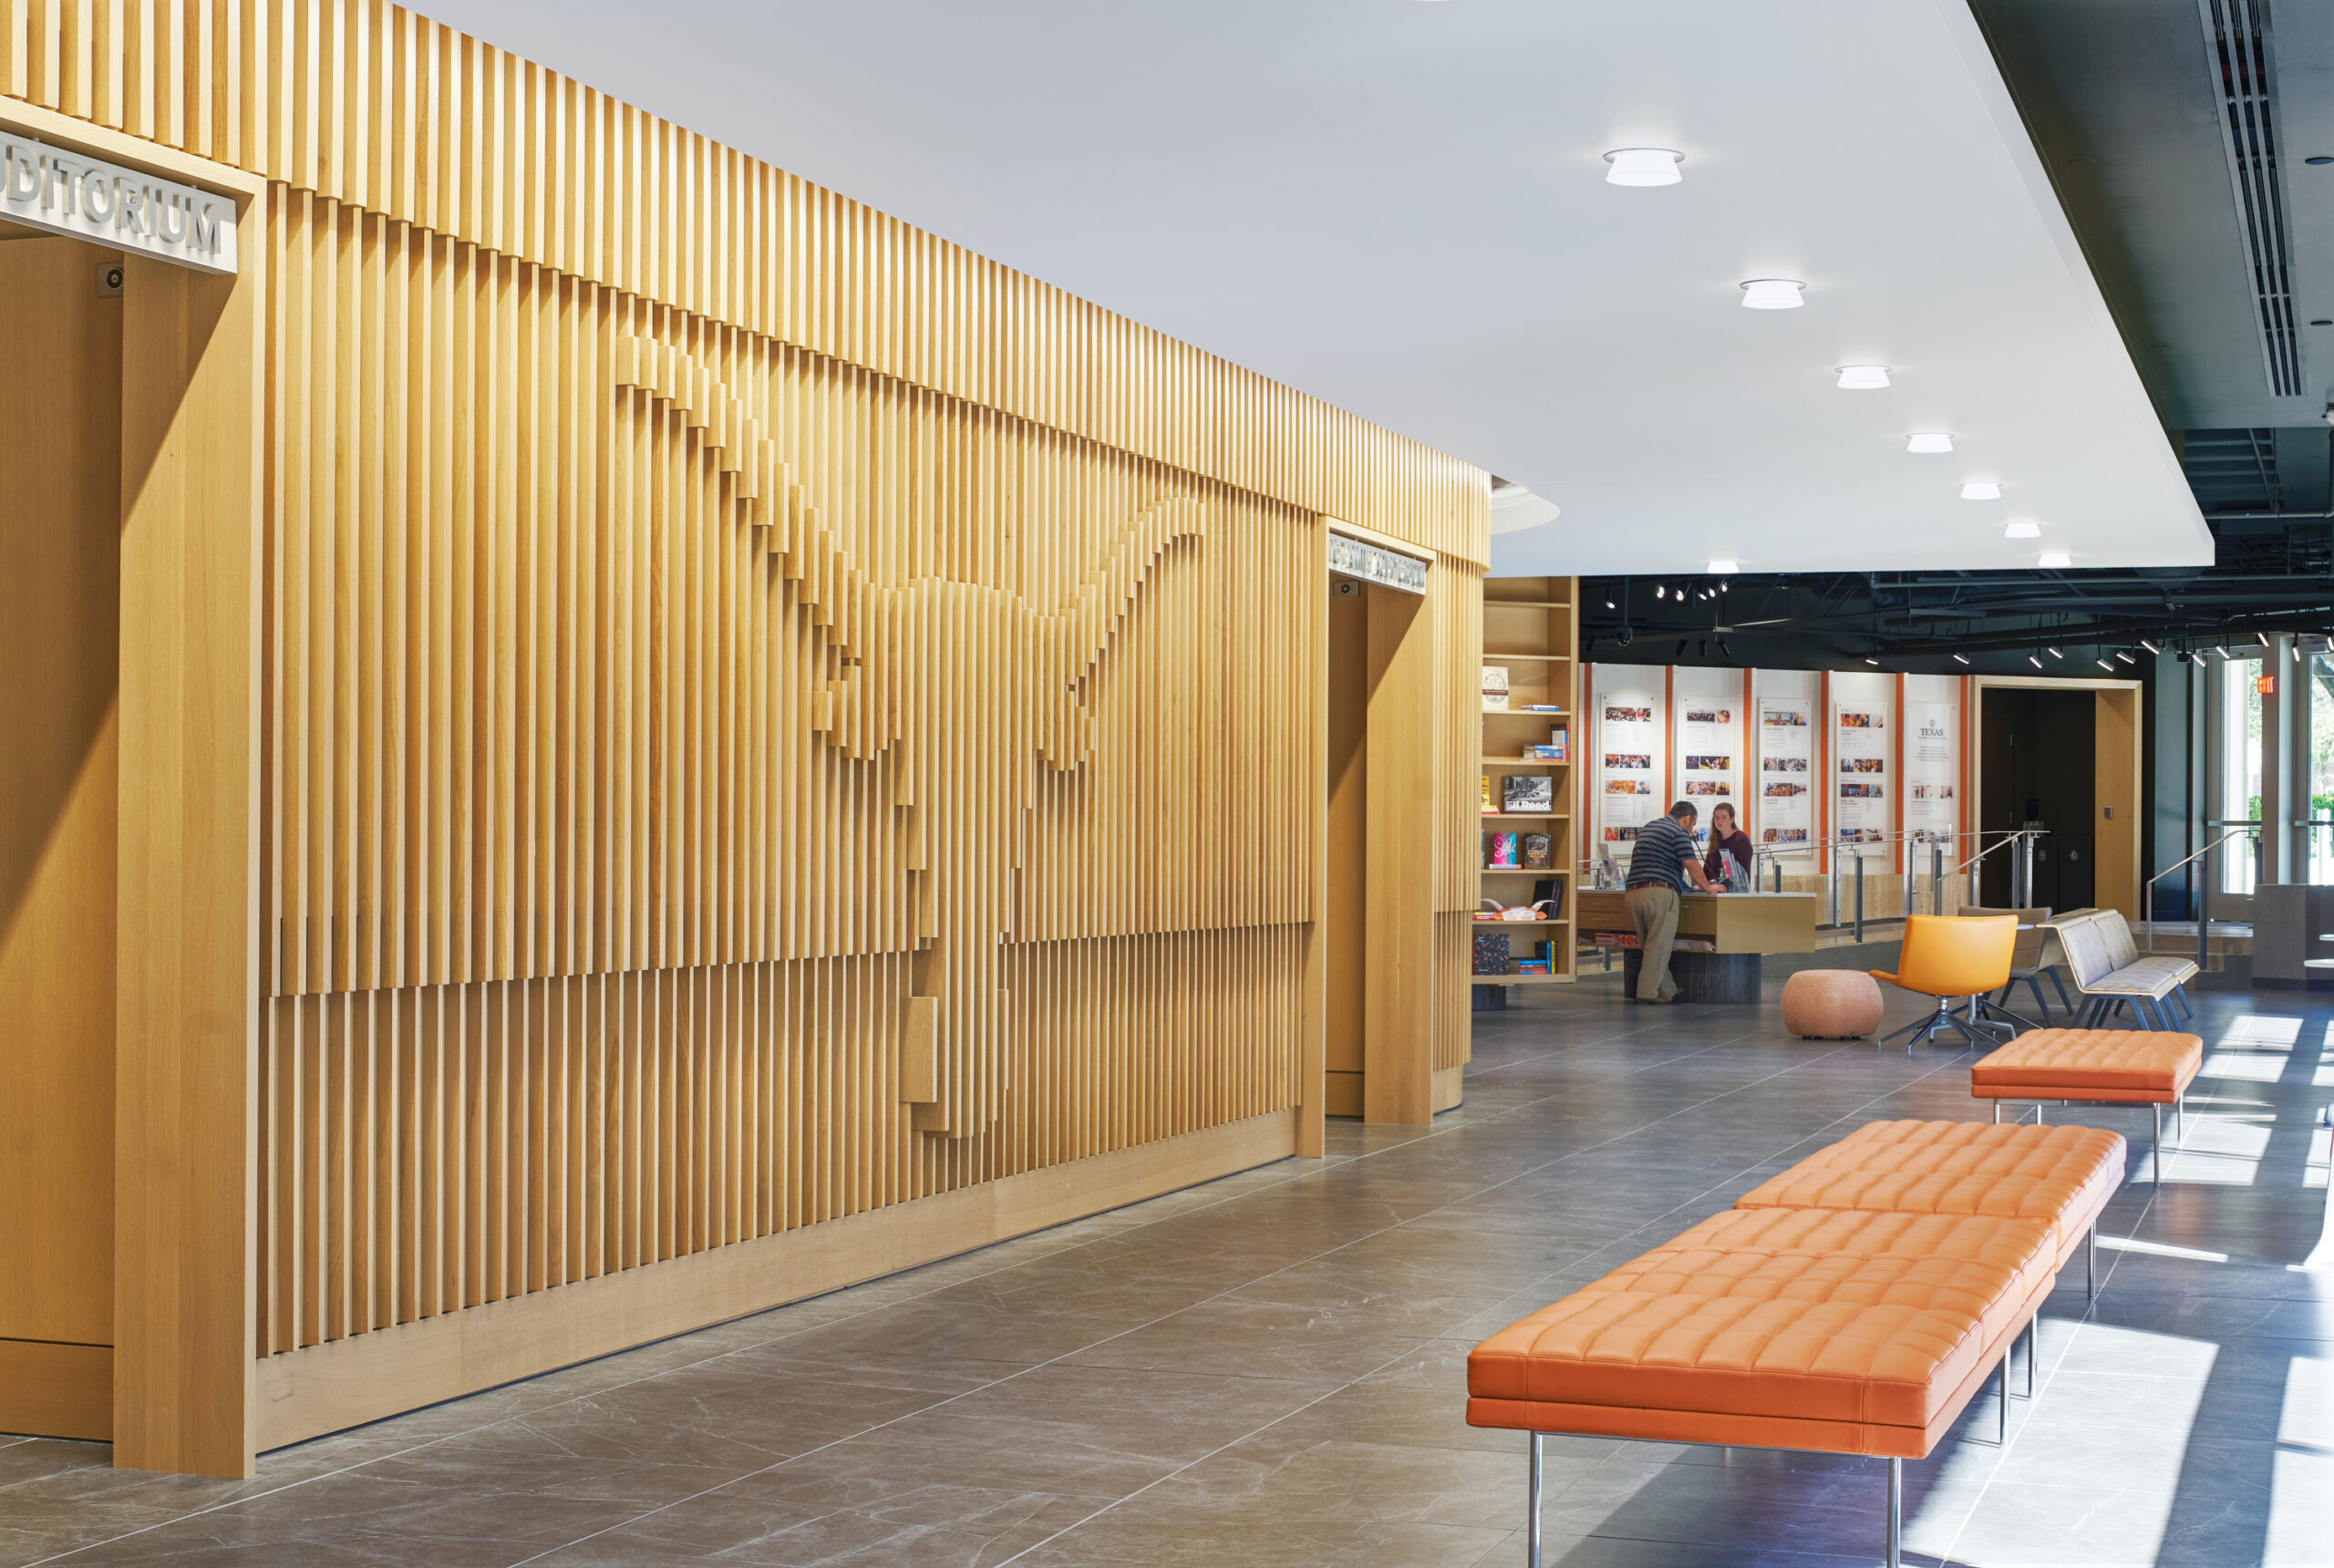 image of Welcome Center at the University of Texas at Austin, wood slat panel wall with longhorn logo detail